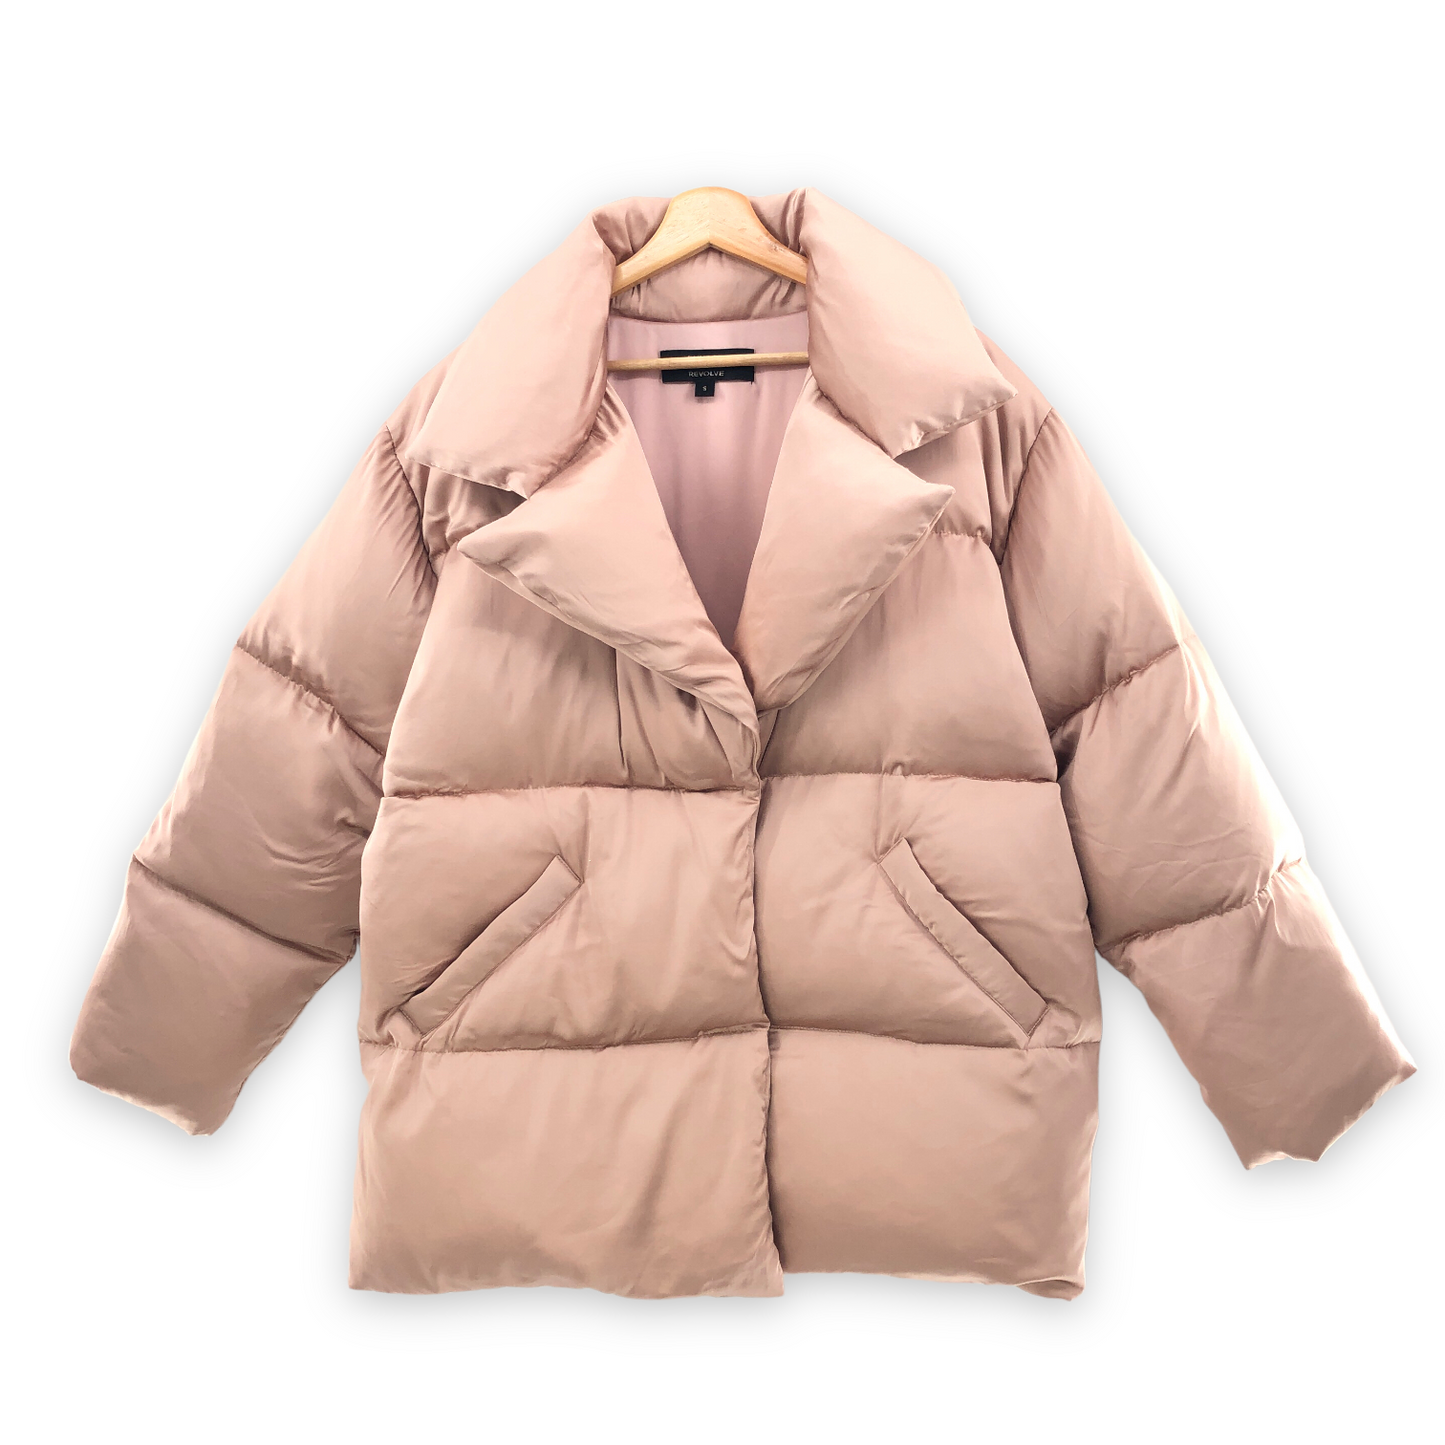 DUNDAS x REVOLVE Bride Audrey Puffer Jacket in Blush Upcycled / Repaired